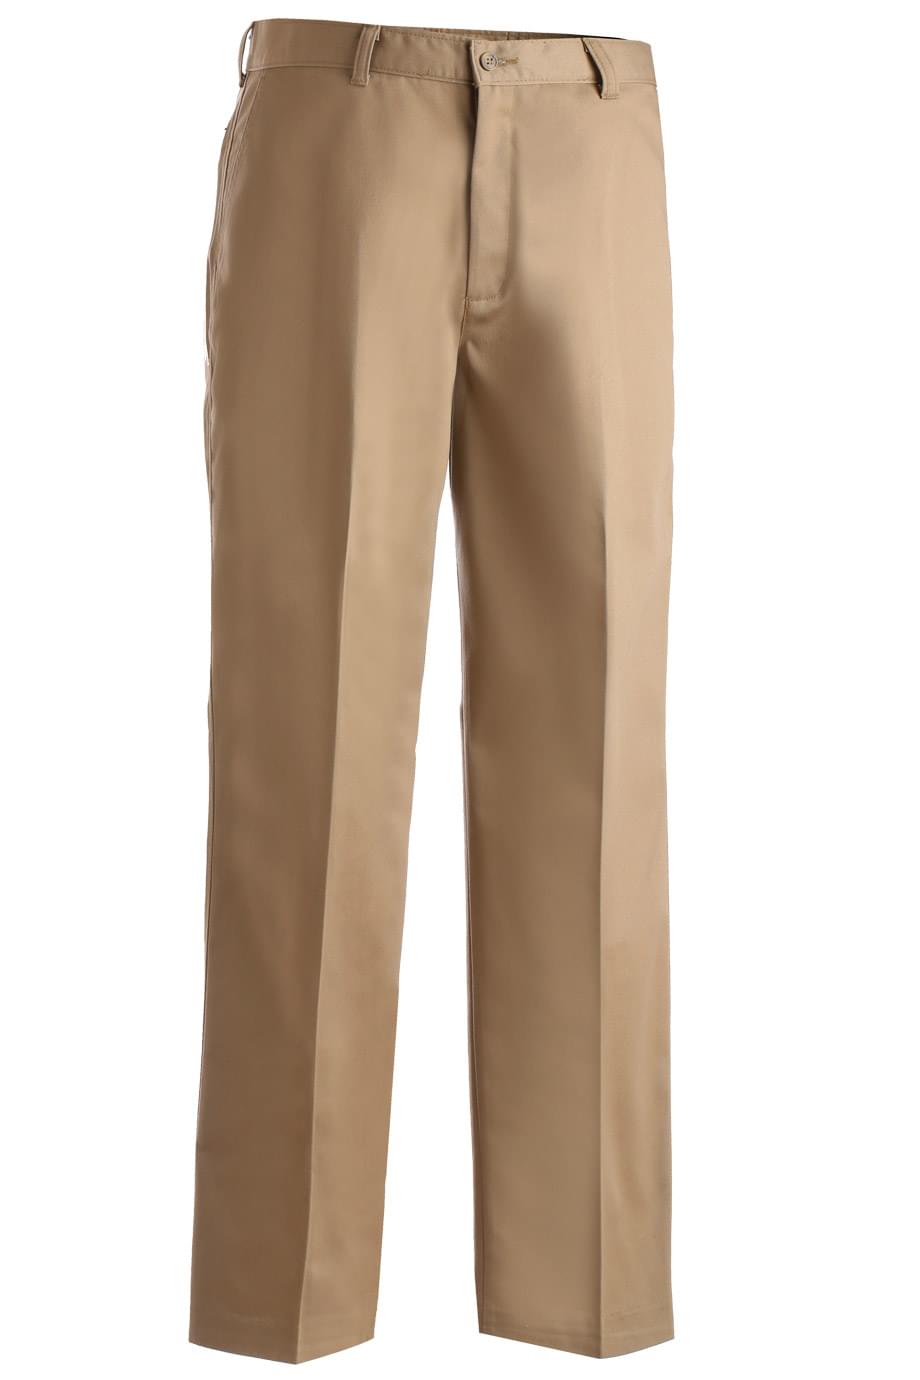 Edwards MENS BLENDED CHINO FLAT FRONT PANT 